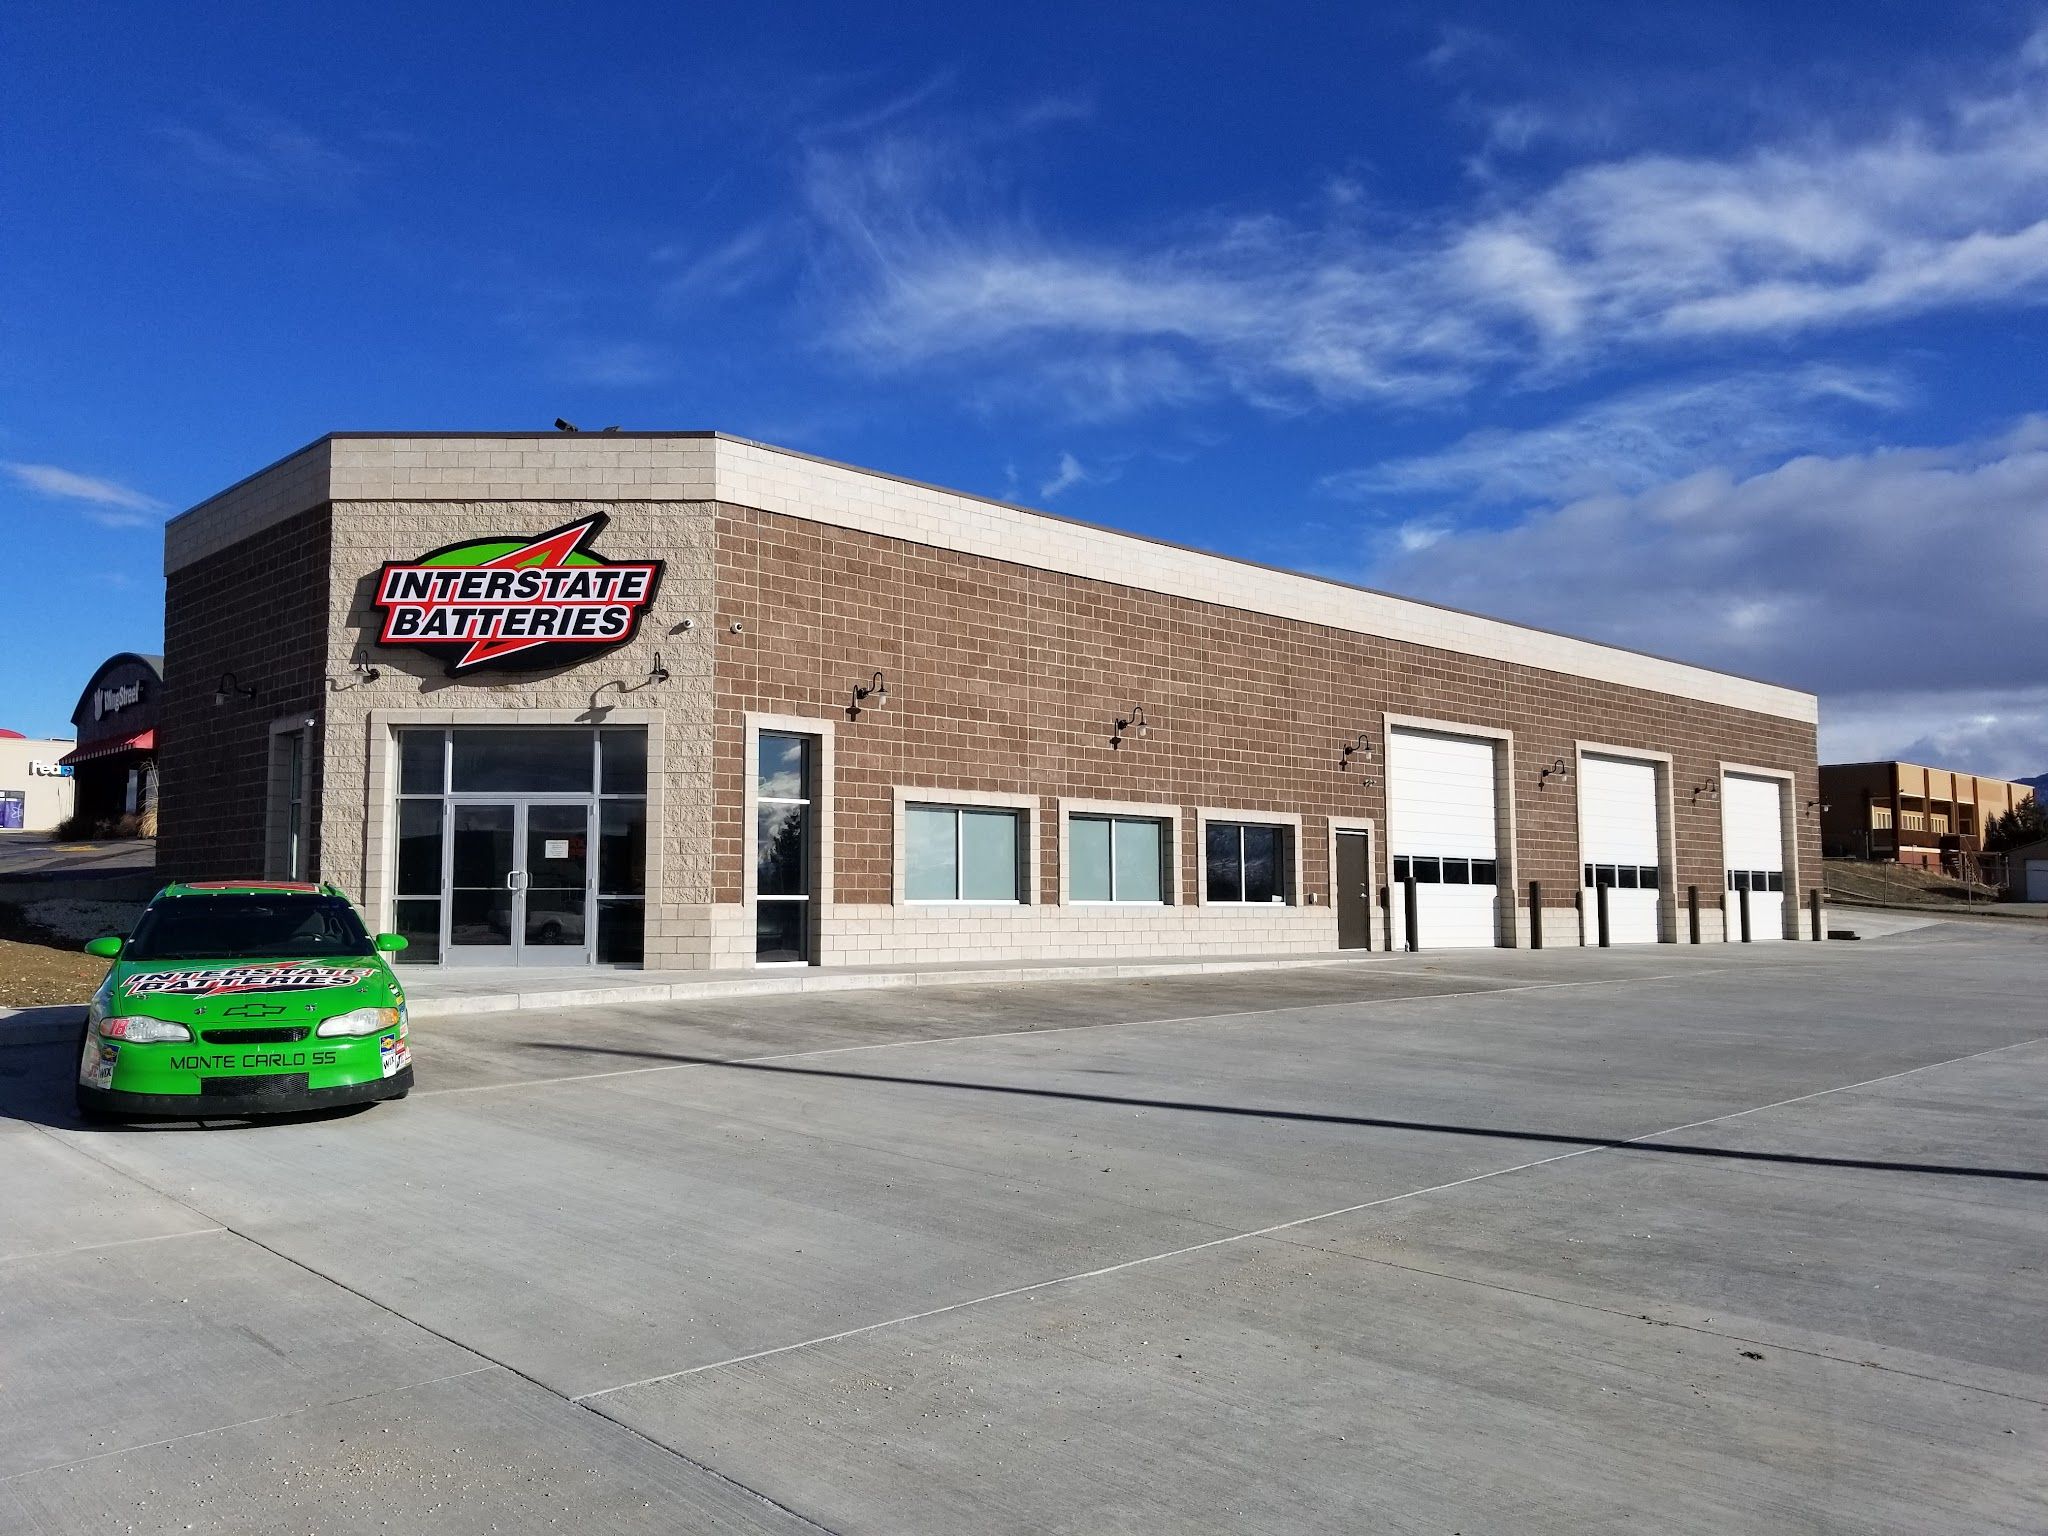 Services & Products Interstate All Battery Center in Casper WY